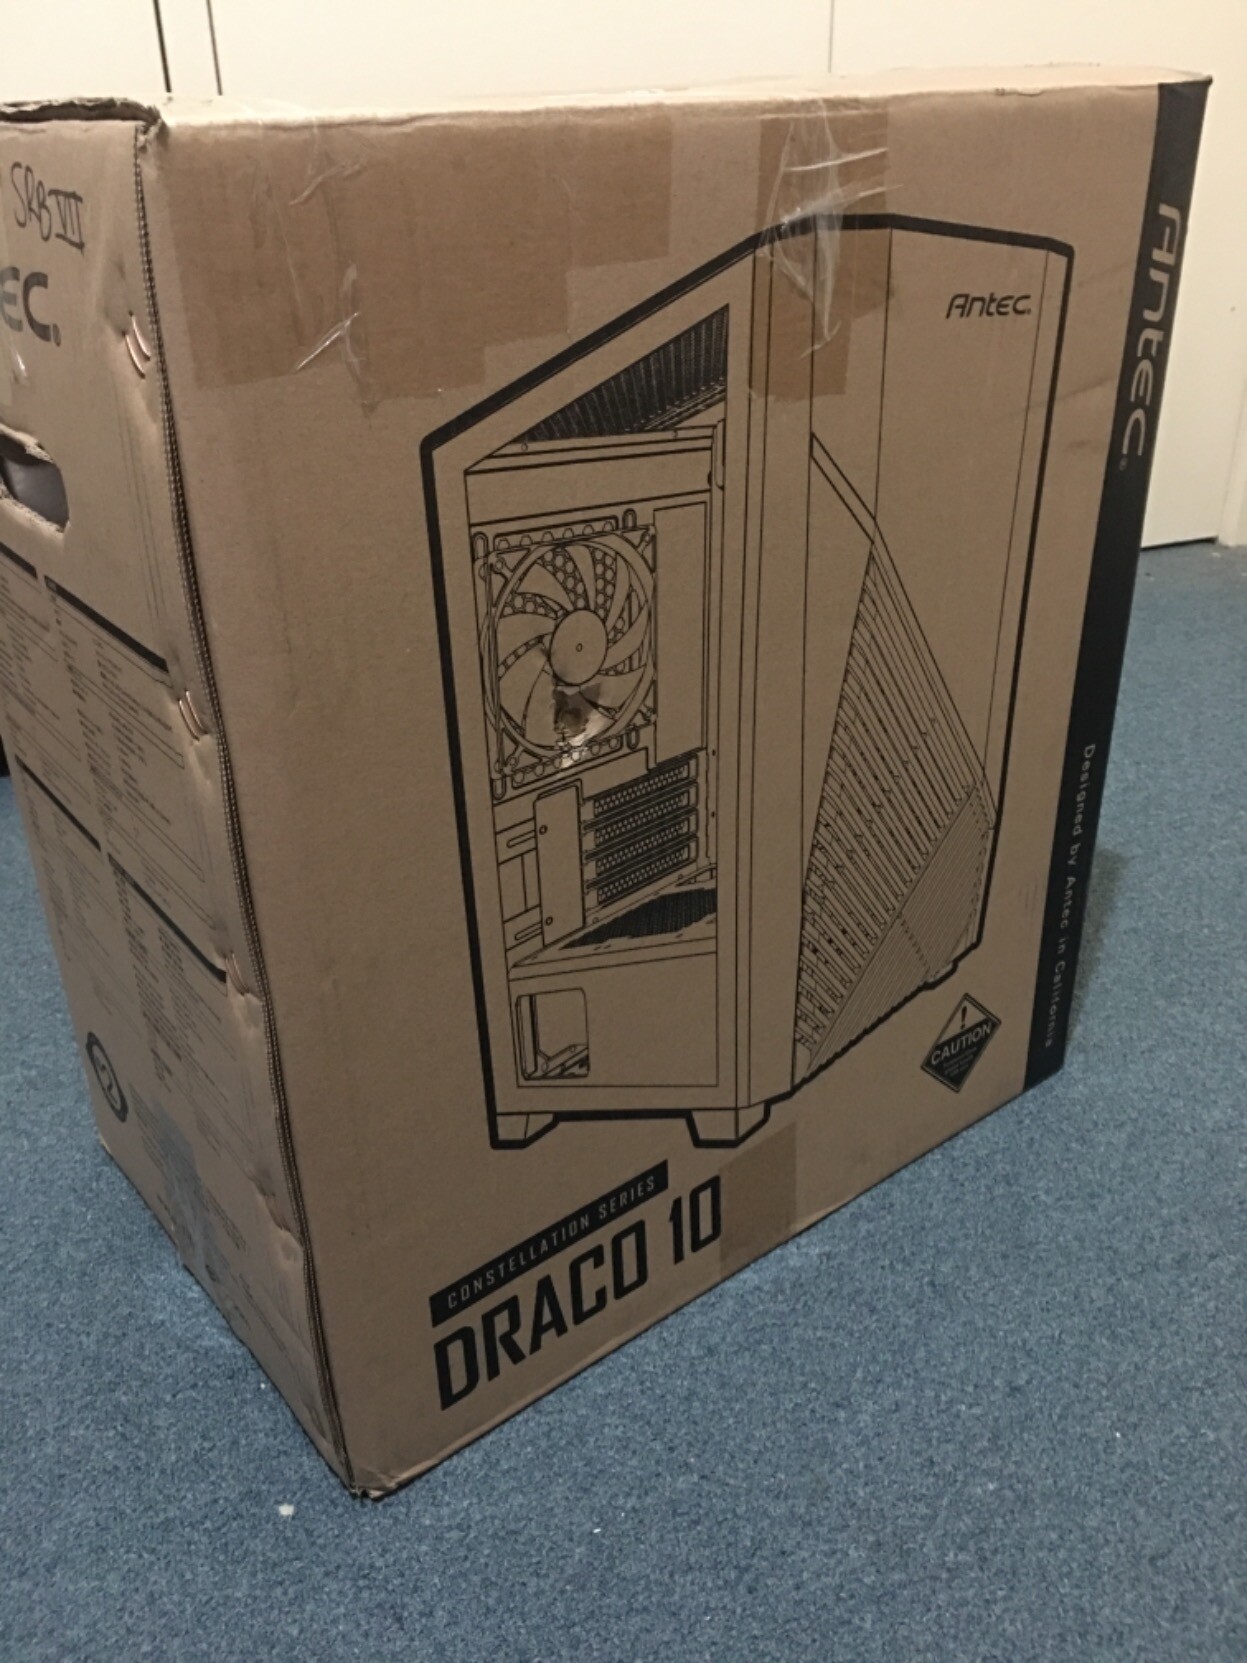 The box the Packard Bell arrived in. It is a box to a Antec Draco 10